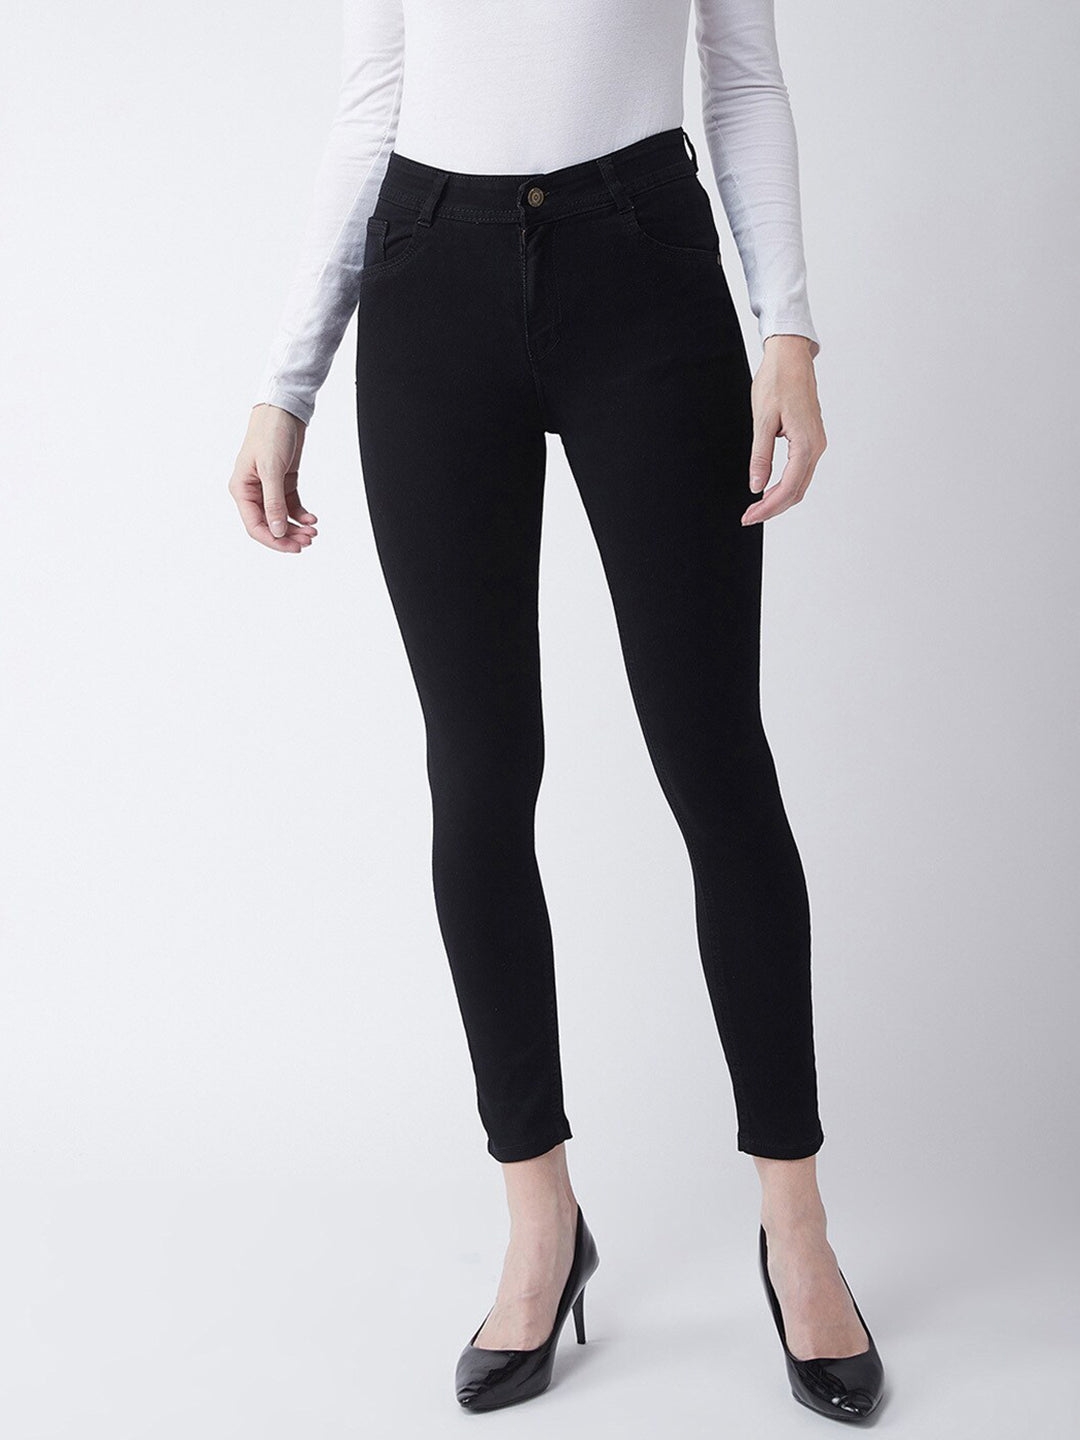 MISS CHASE | Black Slim Fit High Rise Clean Look Cropped Length Stretchable Denim Jeans